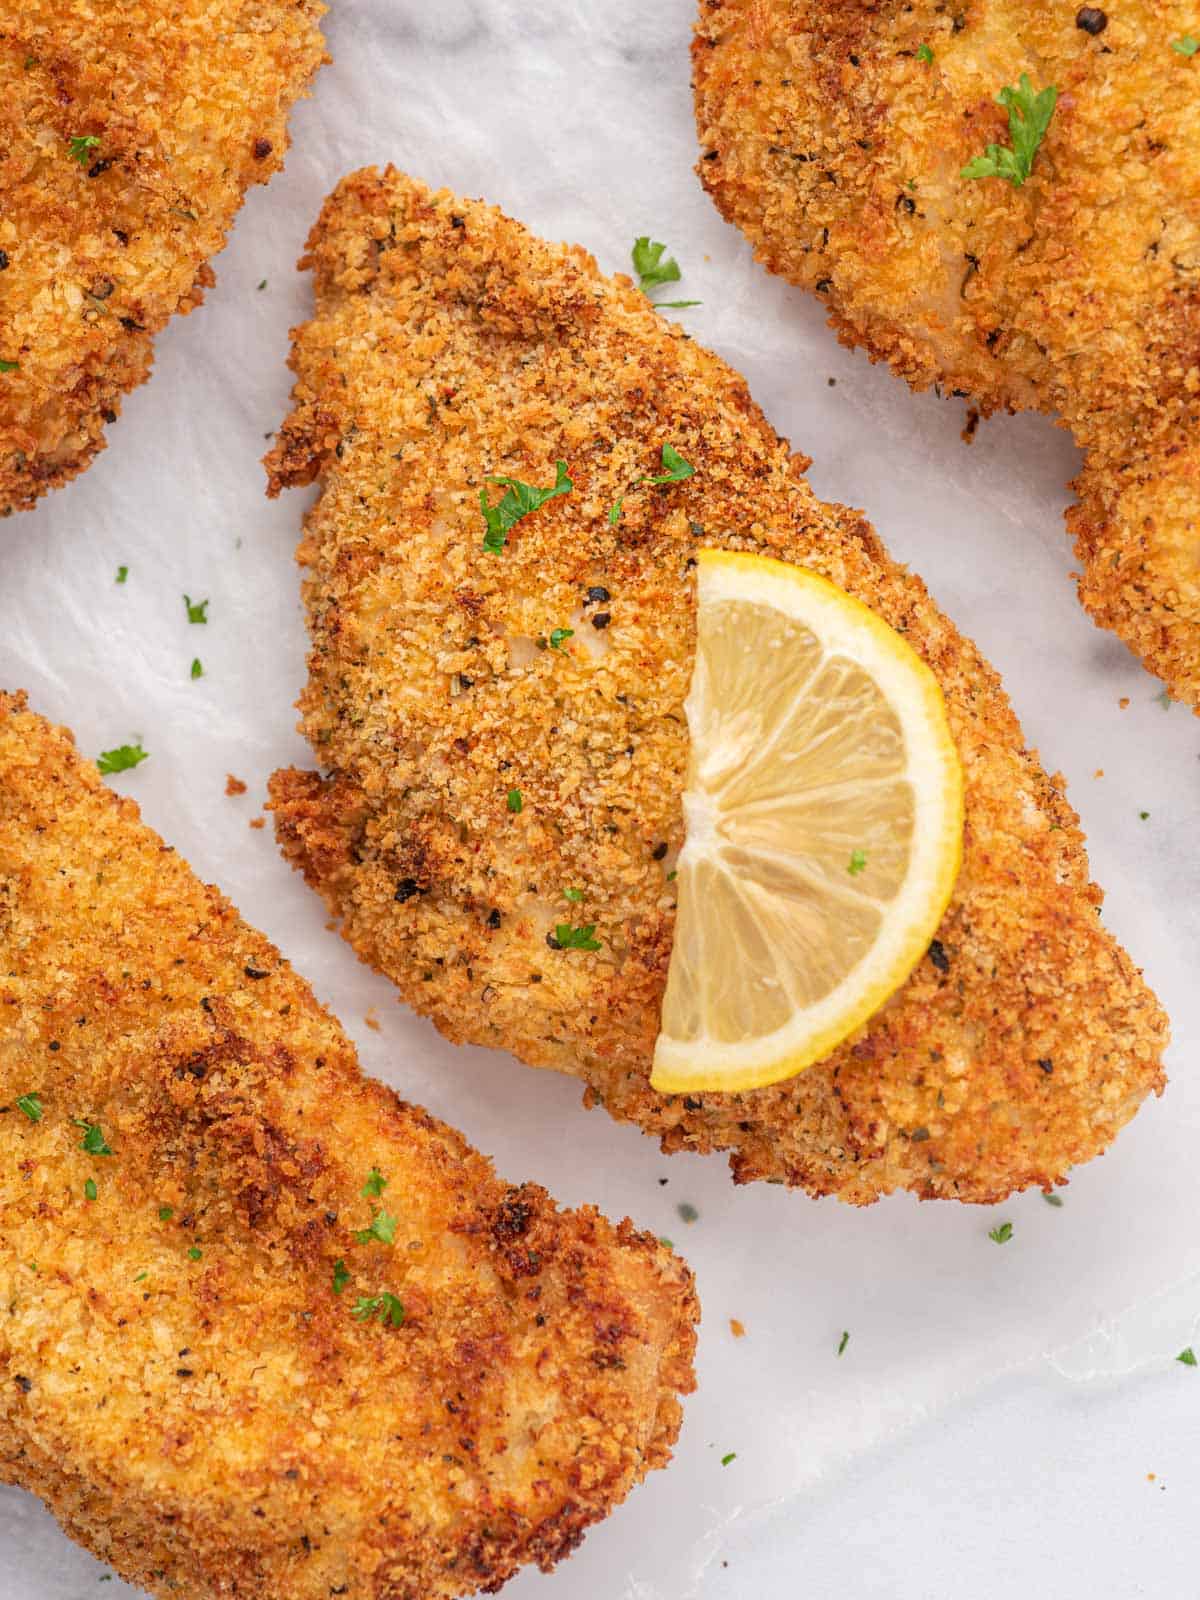 https://www.cookinwithmima.com/wp-content/uploads/2022/02/Chicken-Cutlets-in-Air-Fryer.jpg